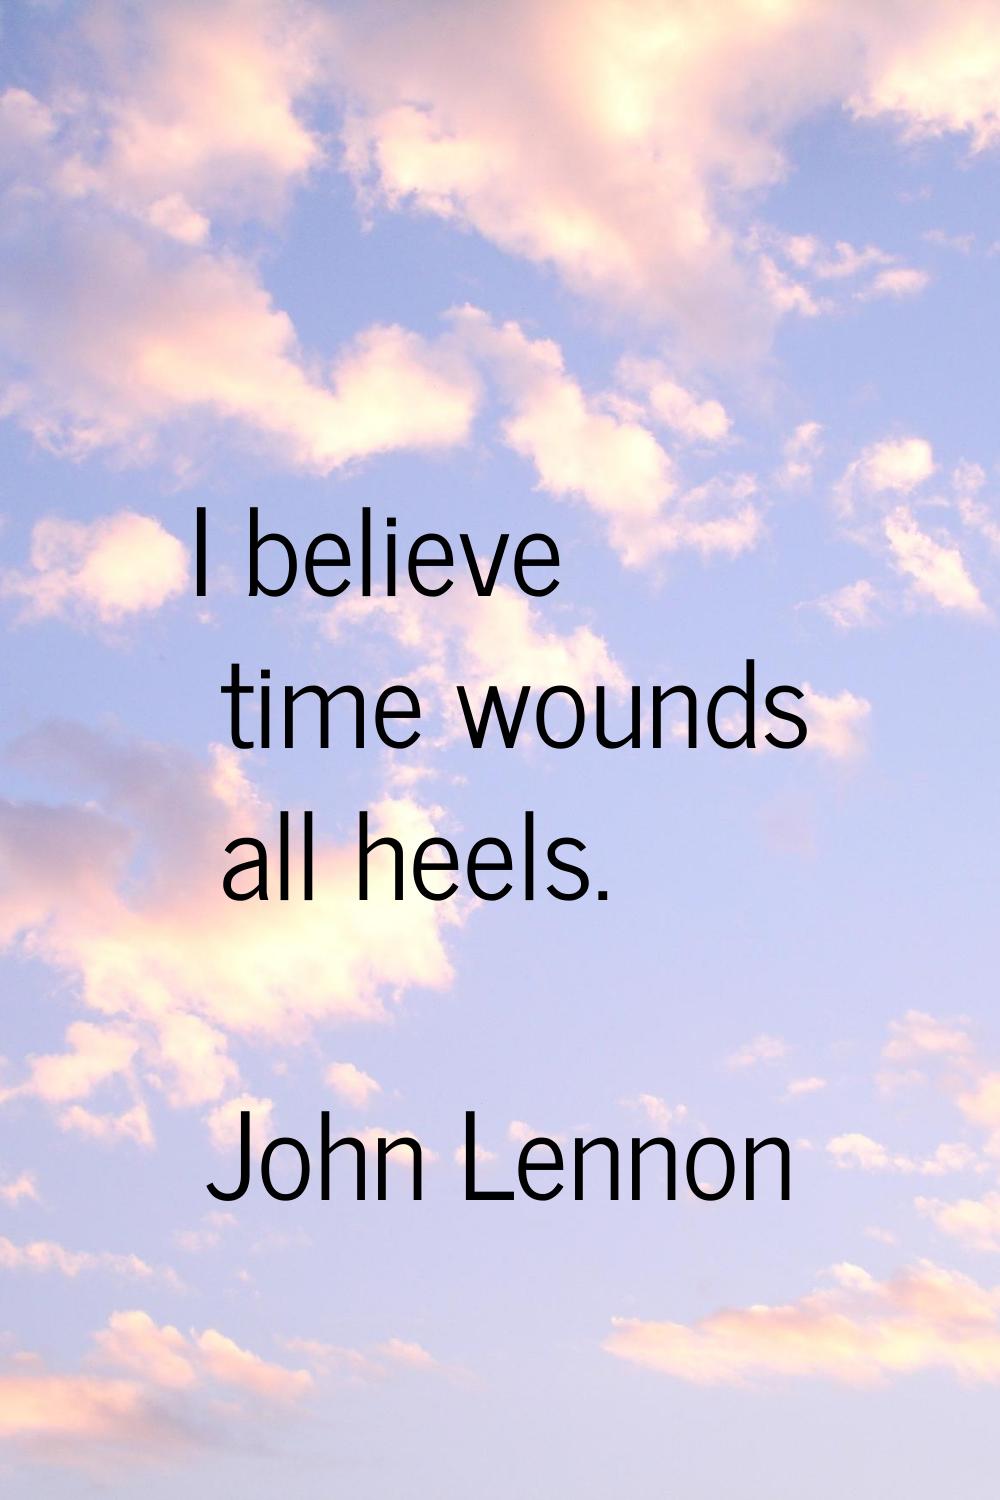 I believe time wounds all heels.